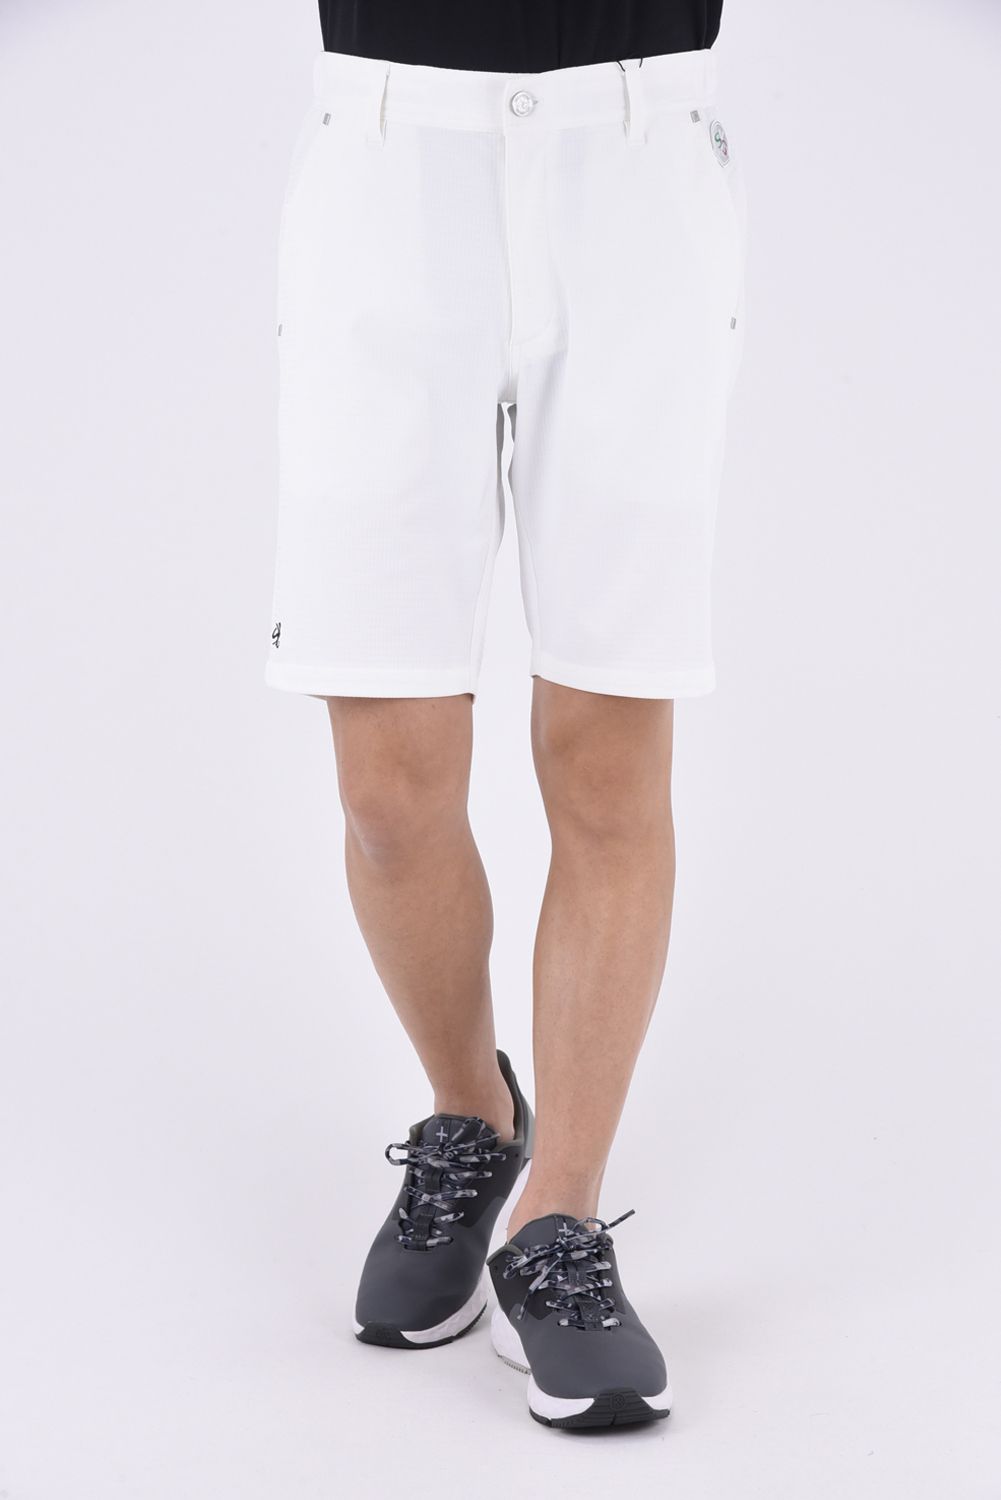 SY32 by SWEET YEARS GOLF - 【ABSOLUTE】 DRY STRETCH CHIDORI JQ